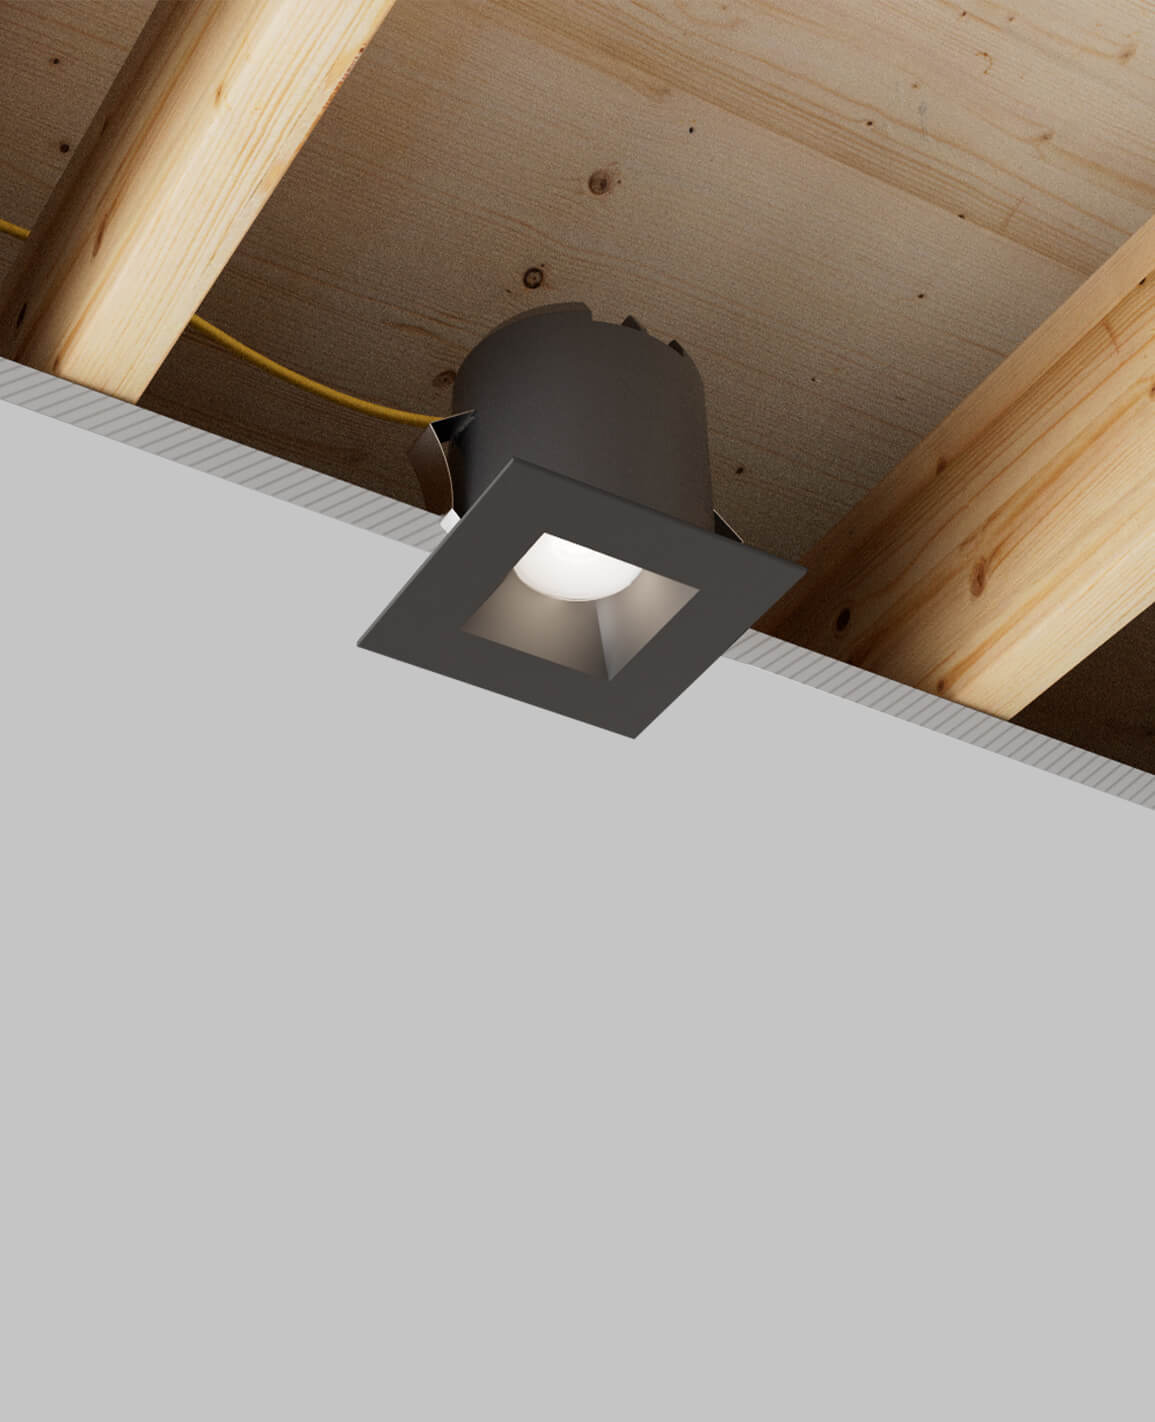 4" LUSA recessed light with remodel housing and black square trim